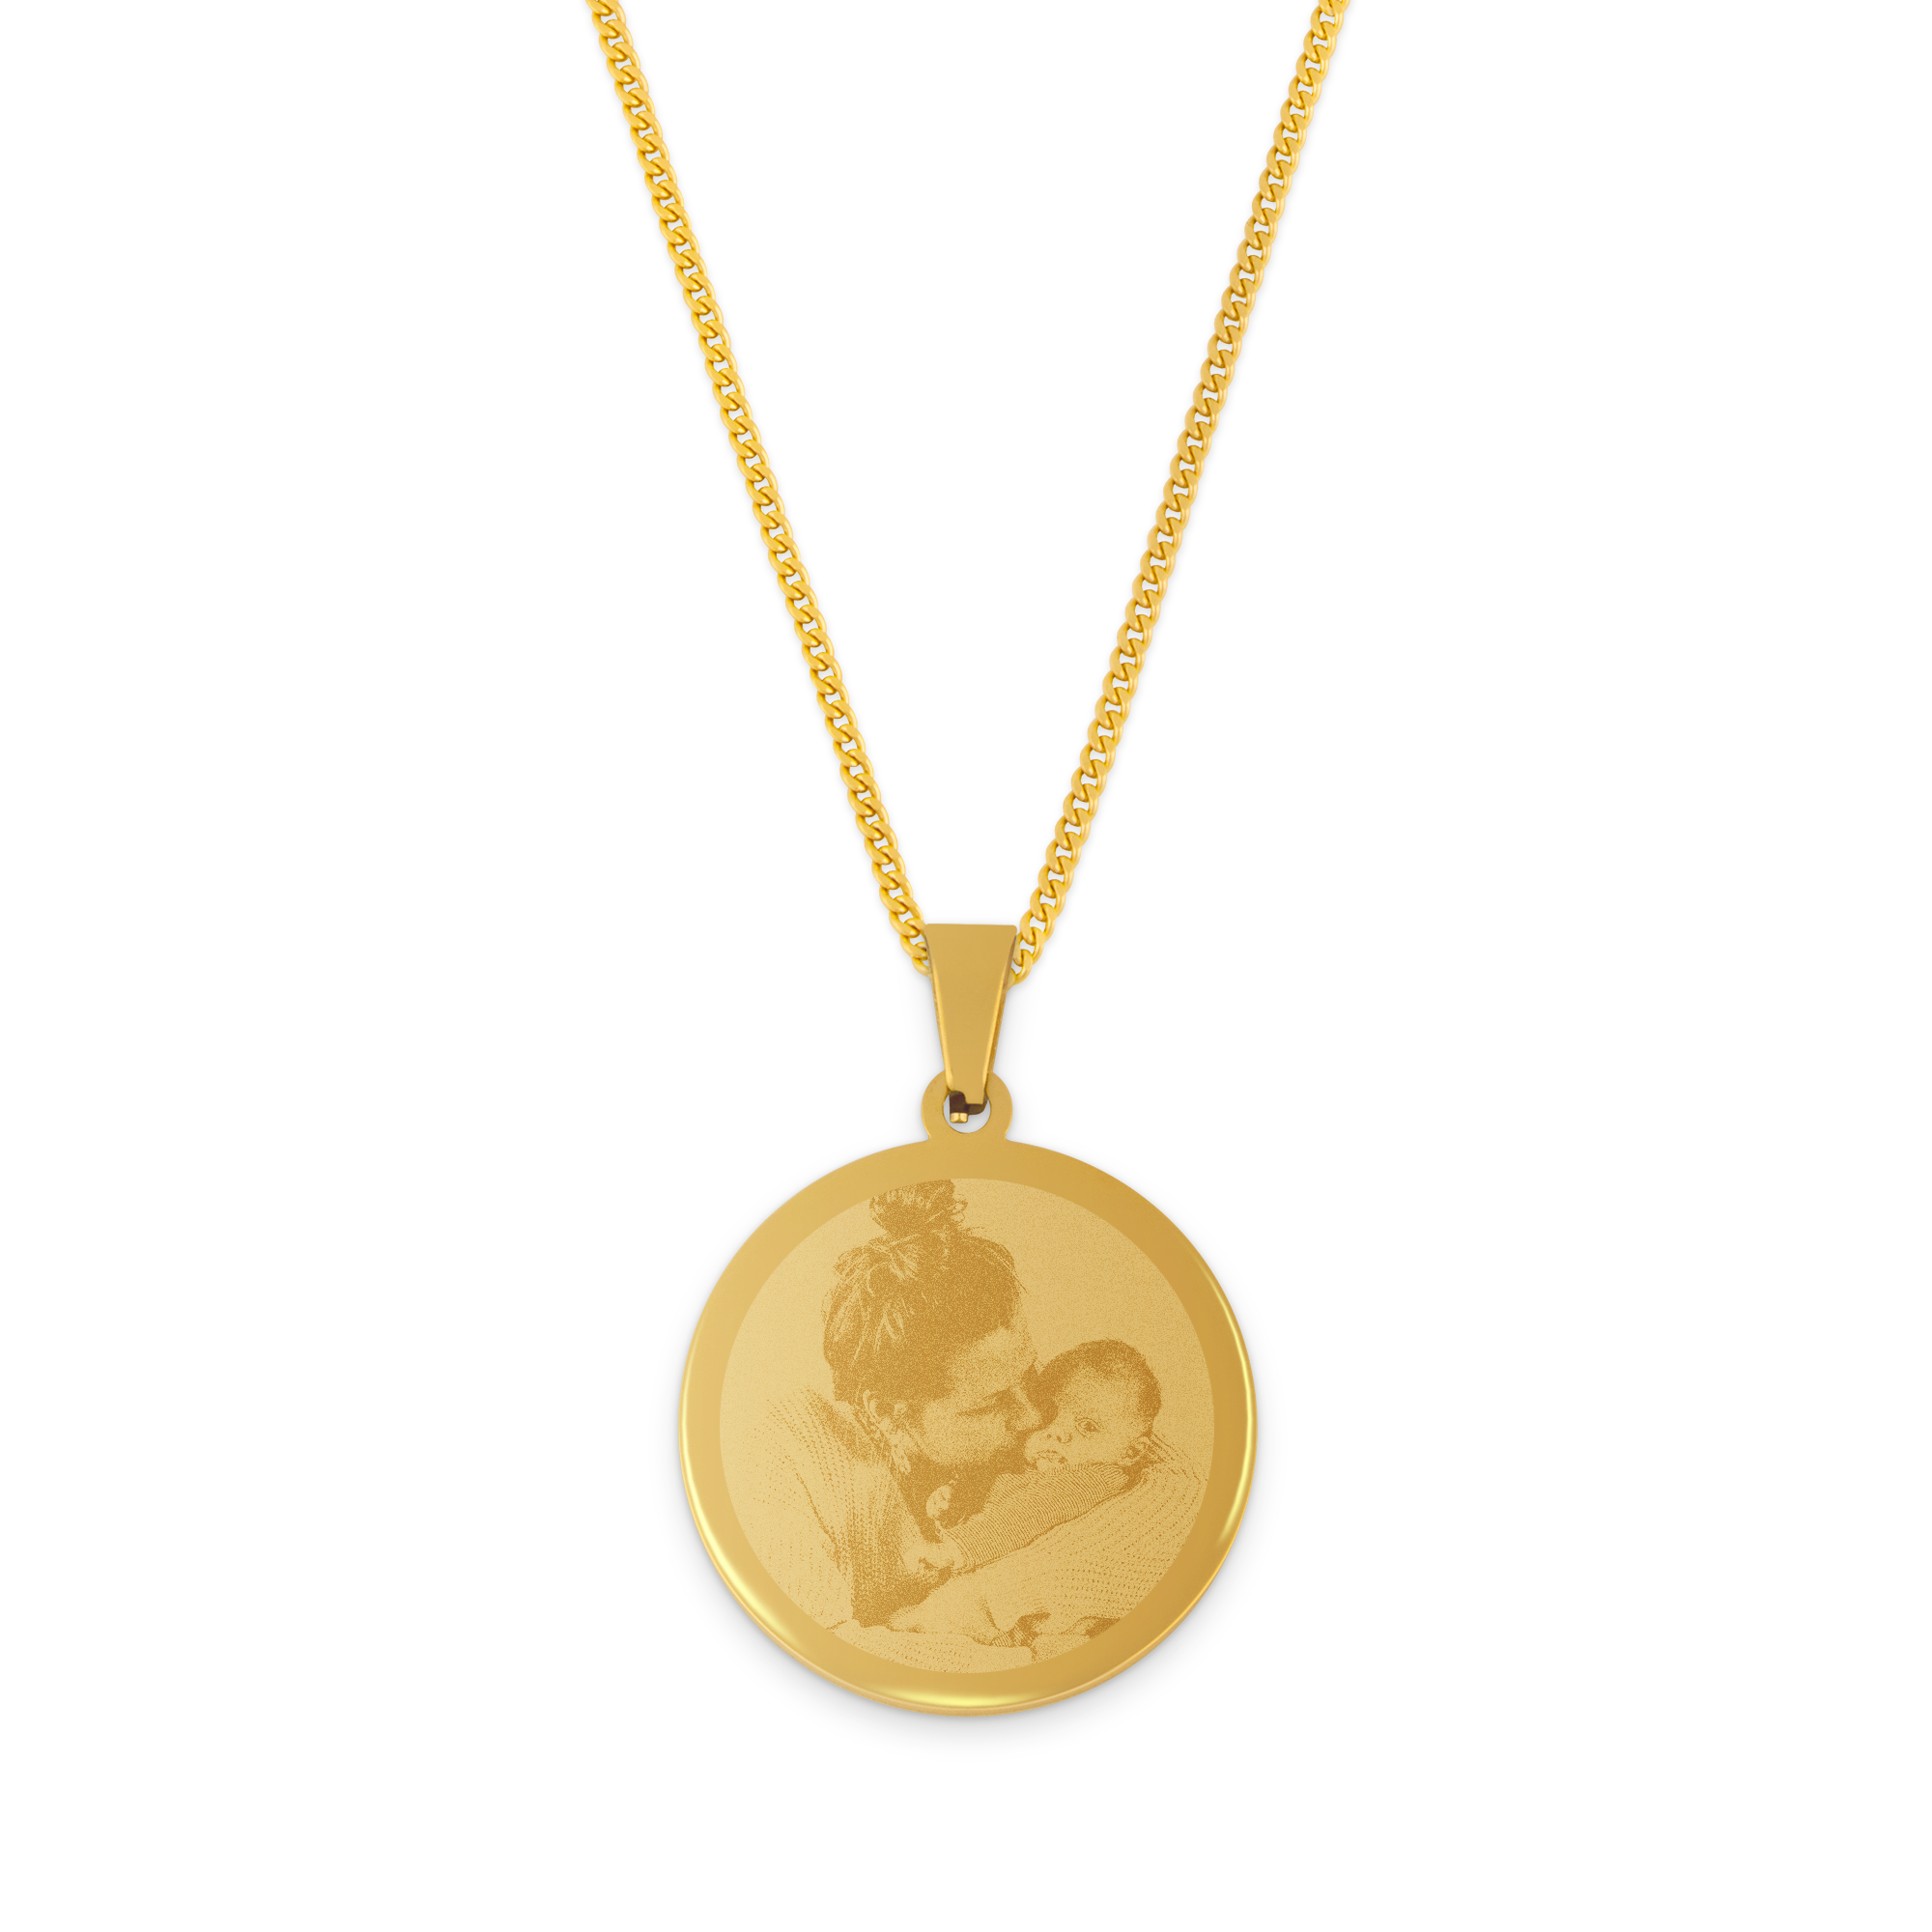 Round pendant with photo - gold